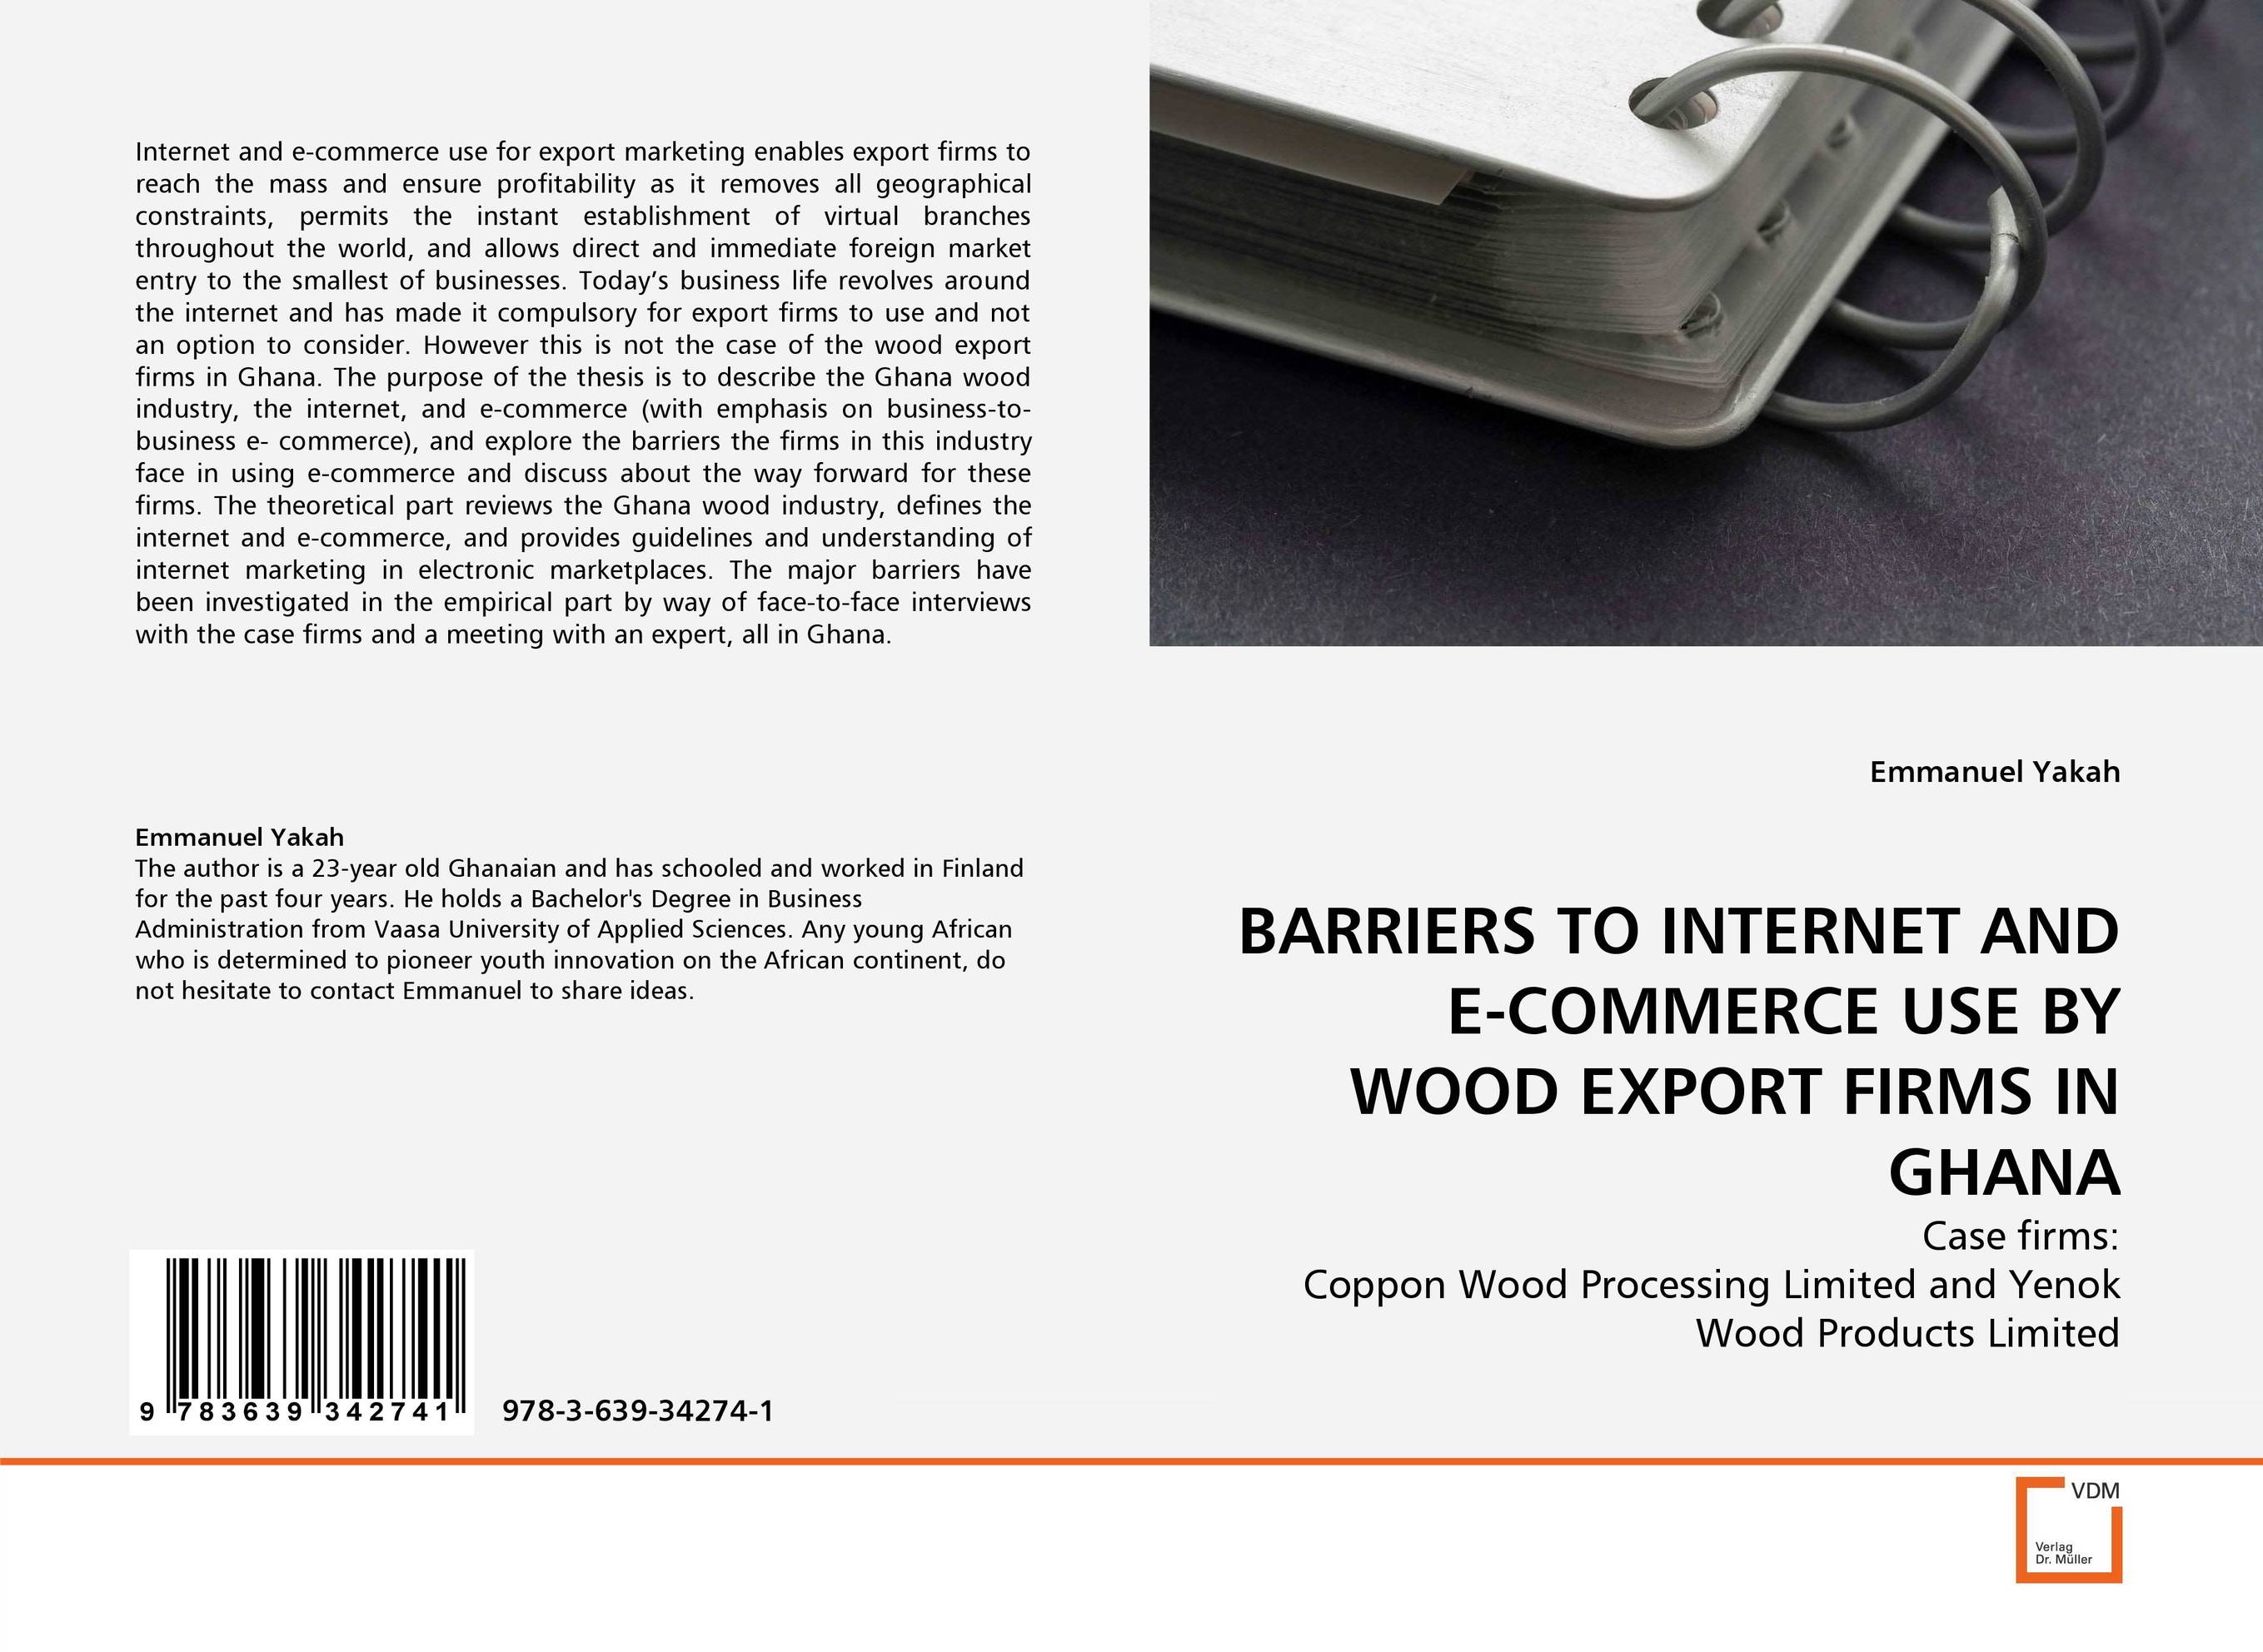 BARRIERS TO INTERNET AND E-COMMERCE USE BY WOOD EXPORT FIRMS IN GHANA